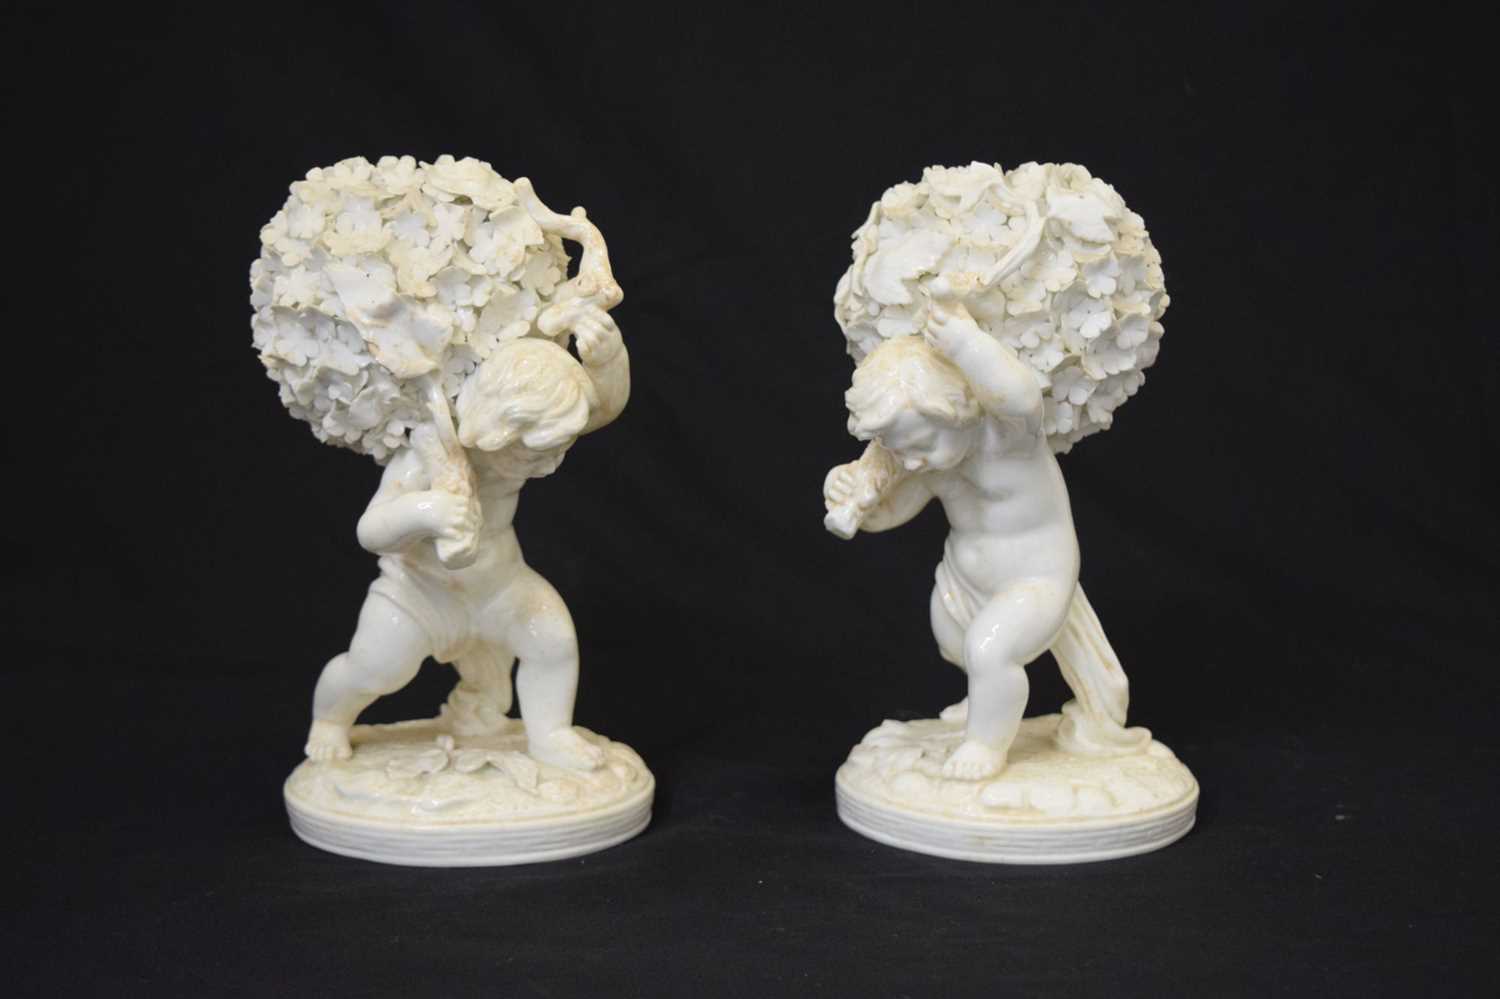 Pair of late 19th century Moore Brothers porcelain figures of cherubs - Image 2 of 9